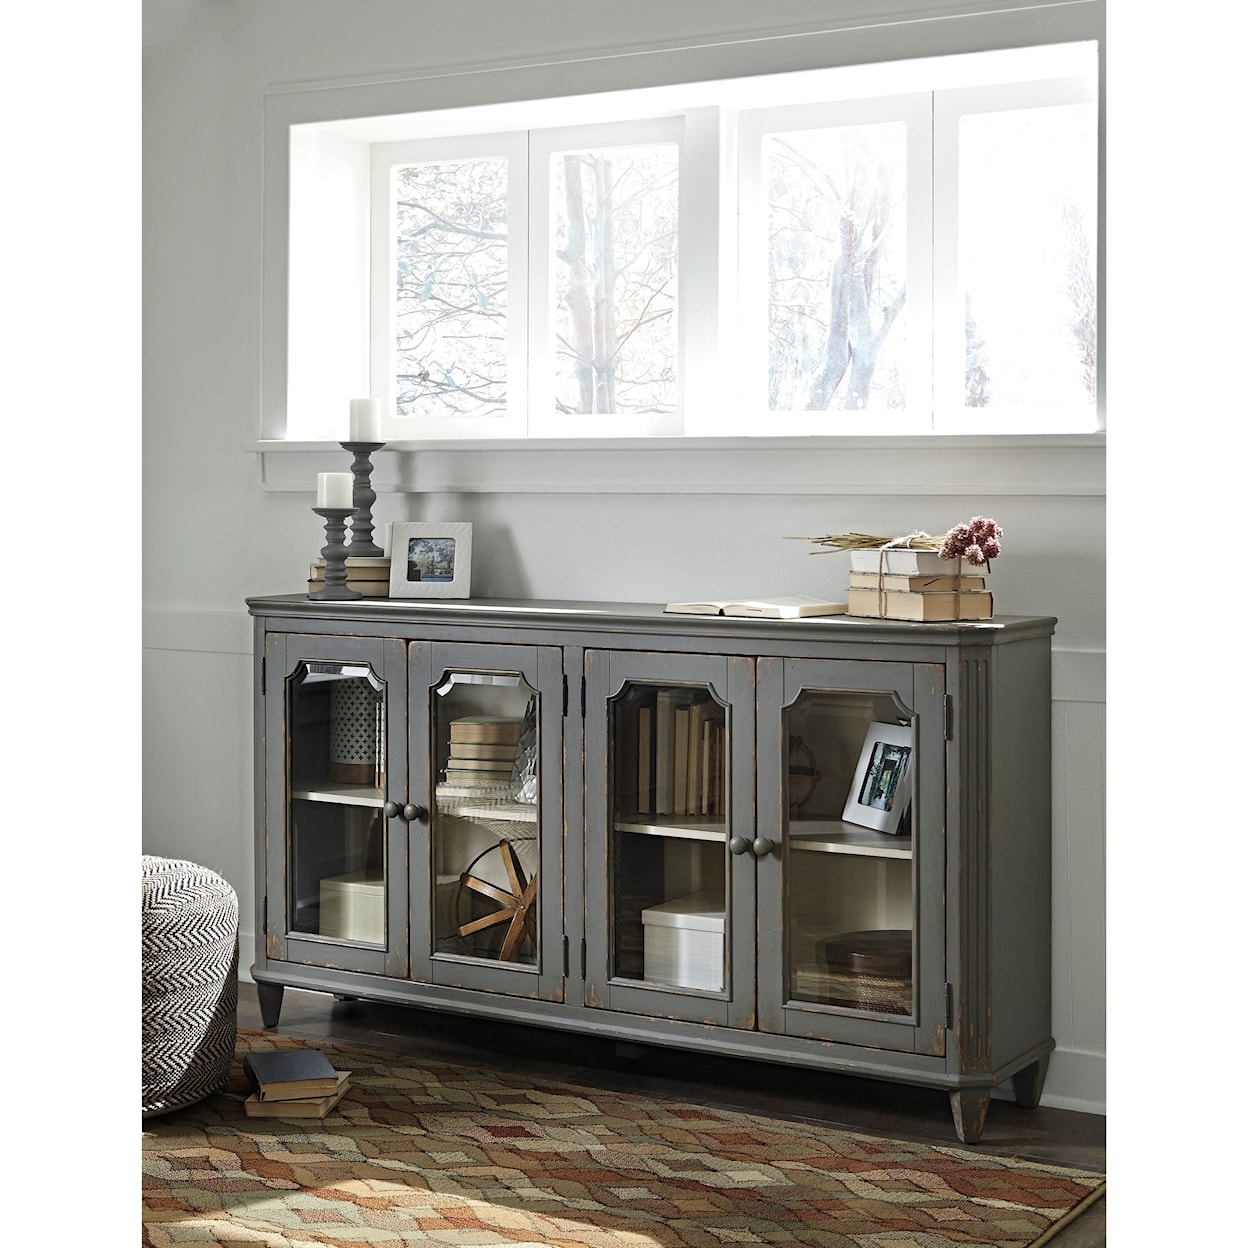 Signature Design by Ashley Cottage Accents Accent Cabinet